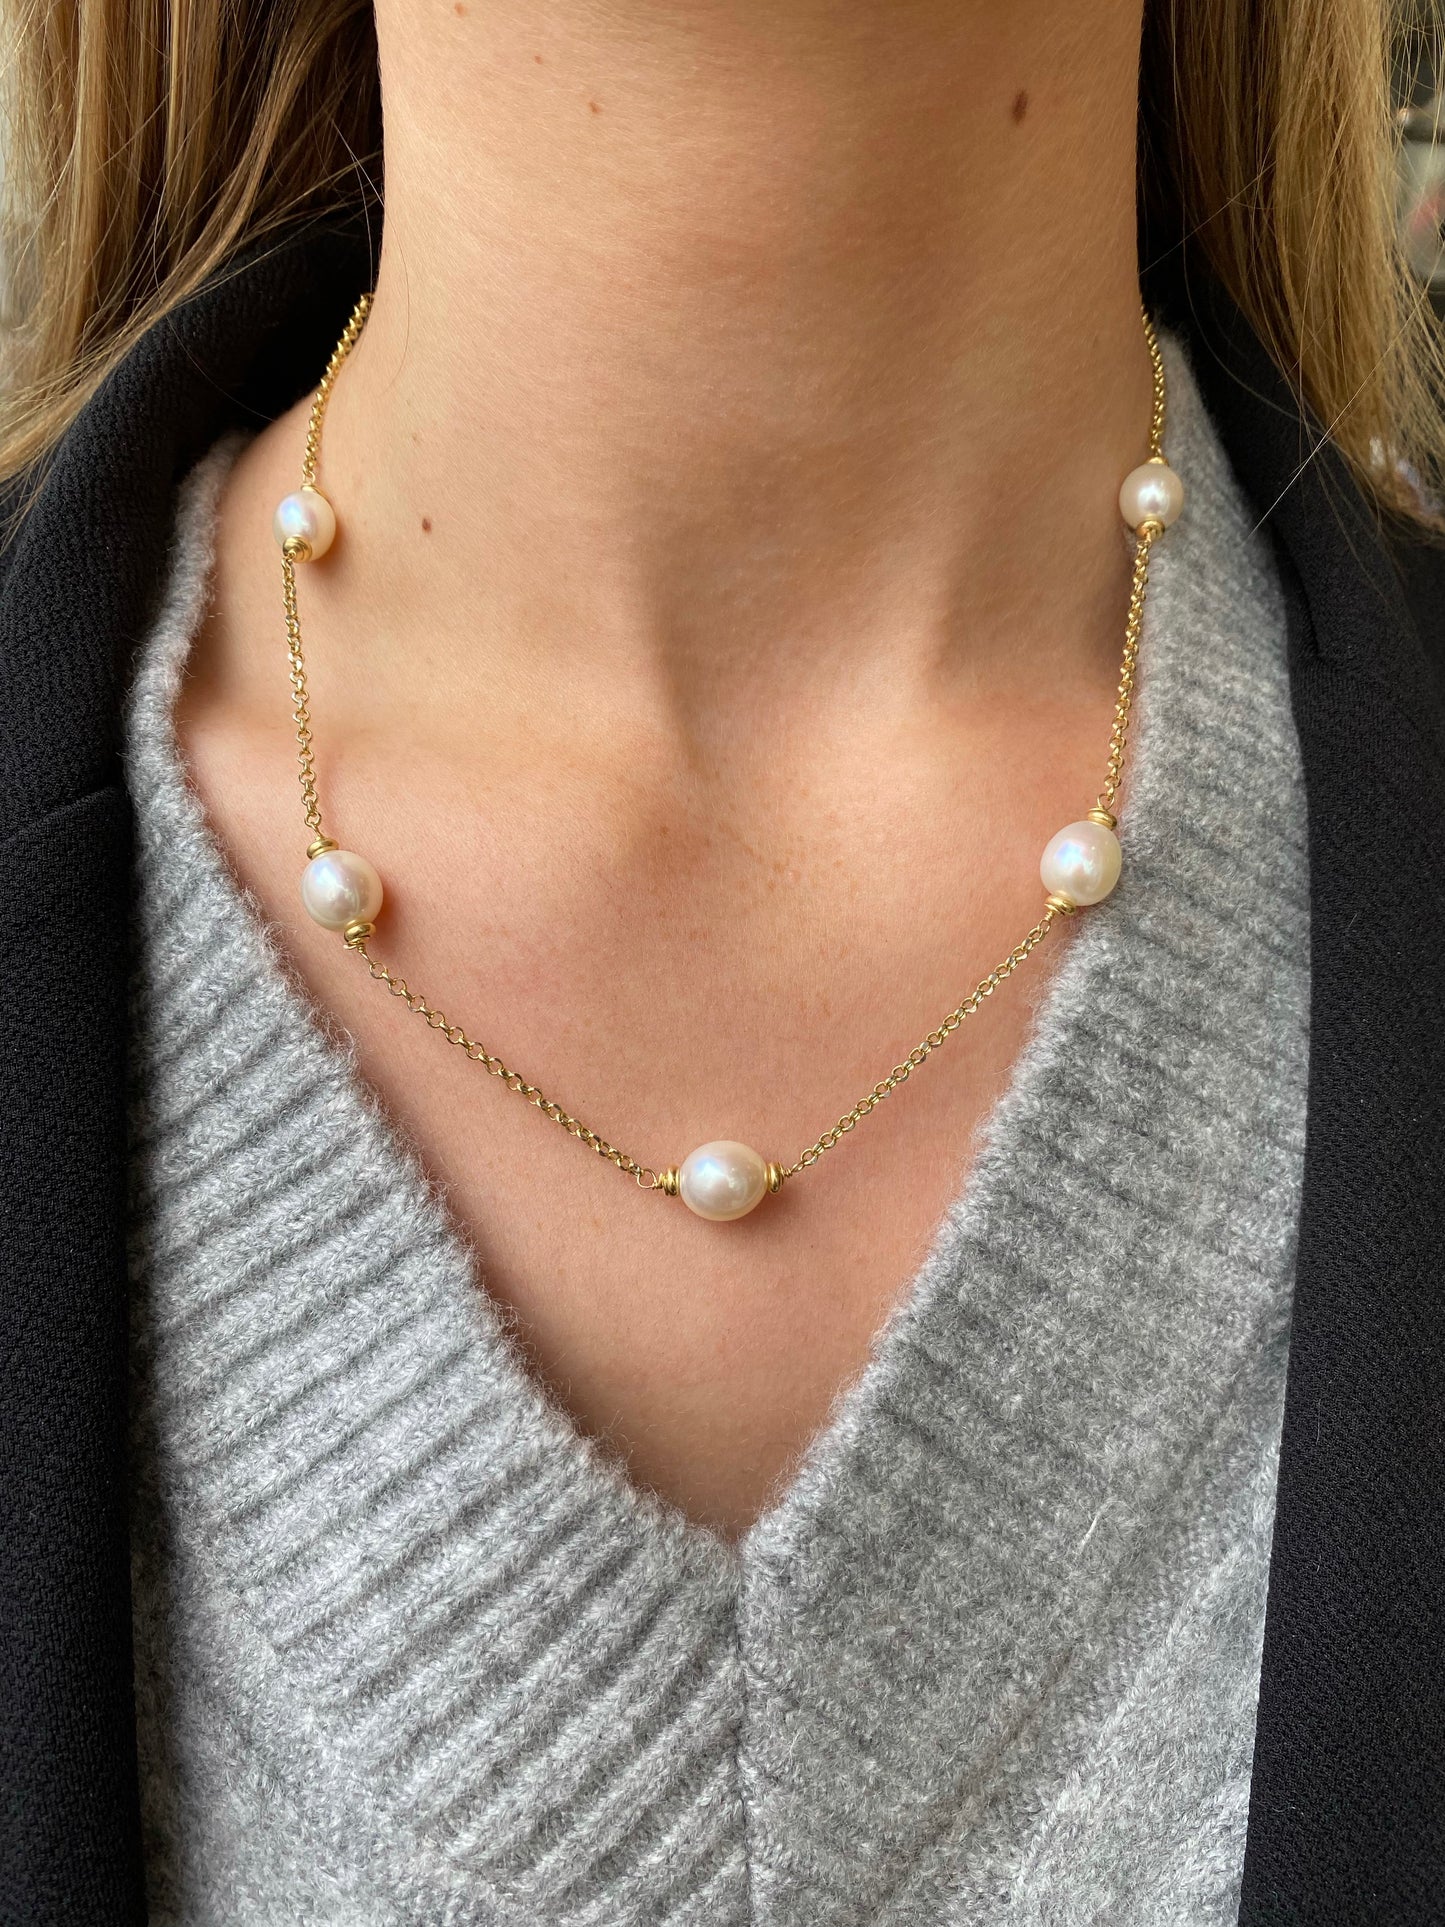 18ct Gold Mini Pearl & Chain Necklace - John Ross Jewellers